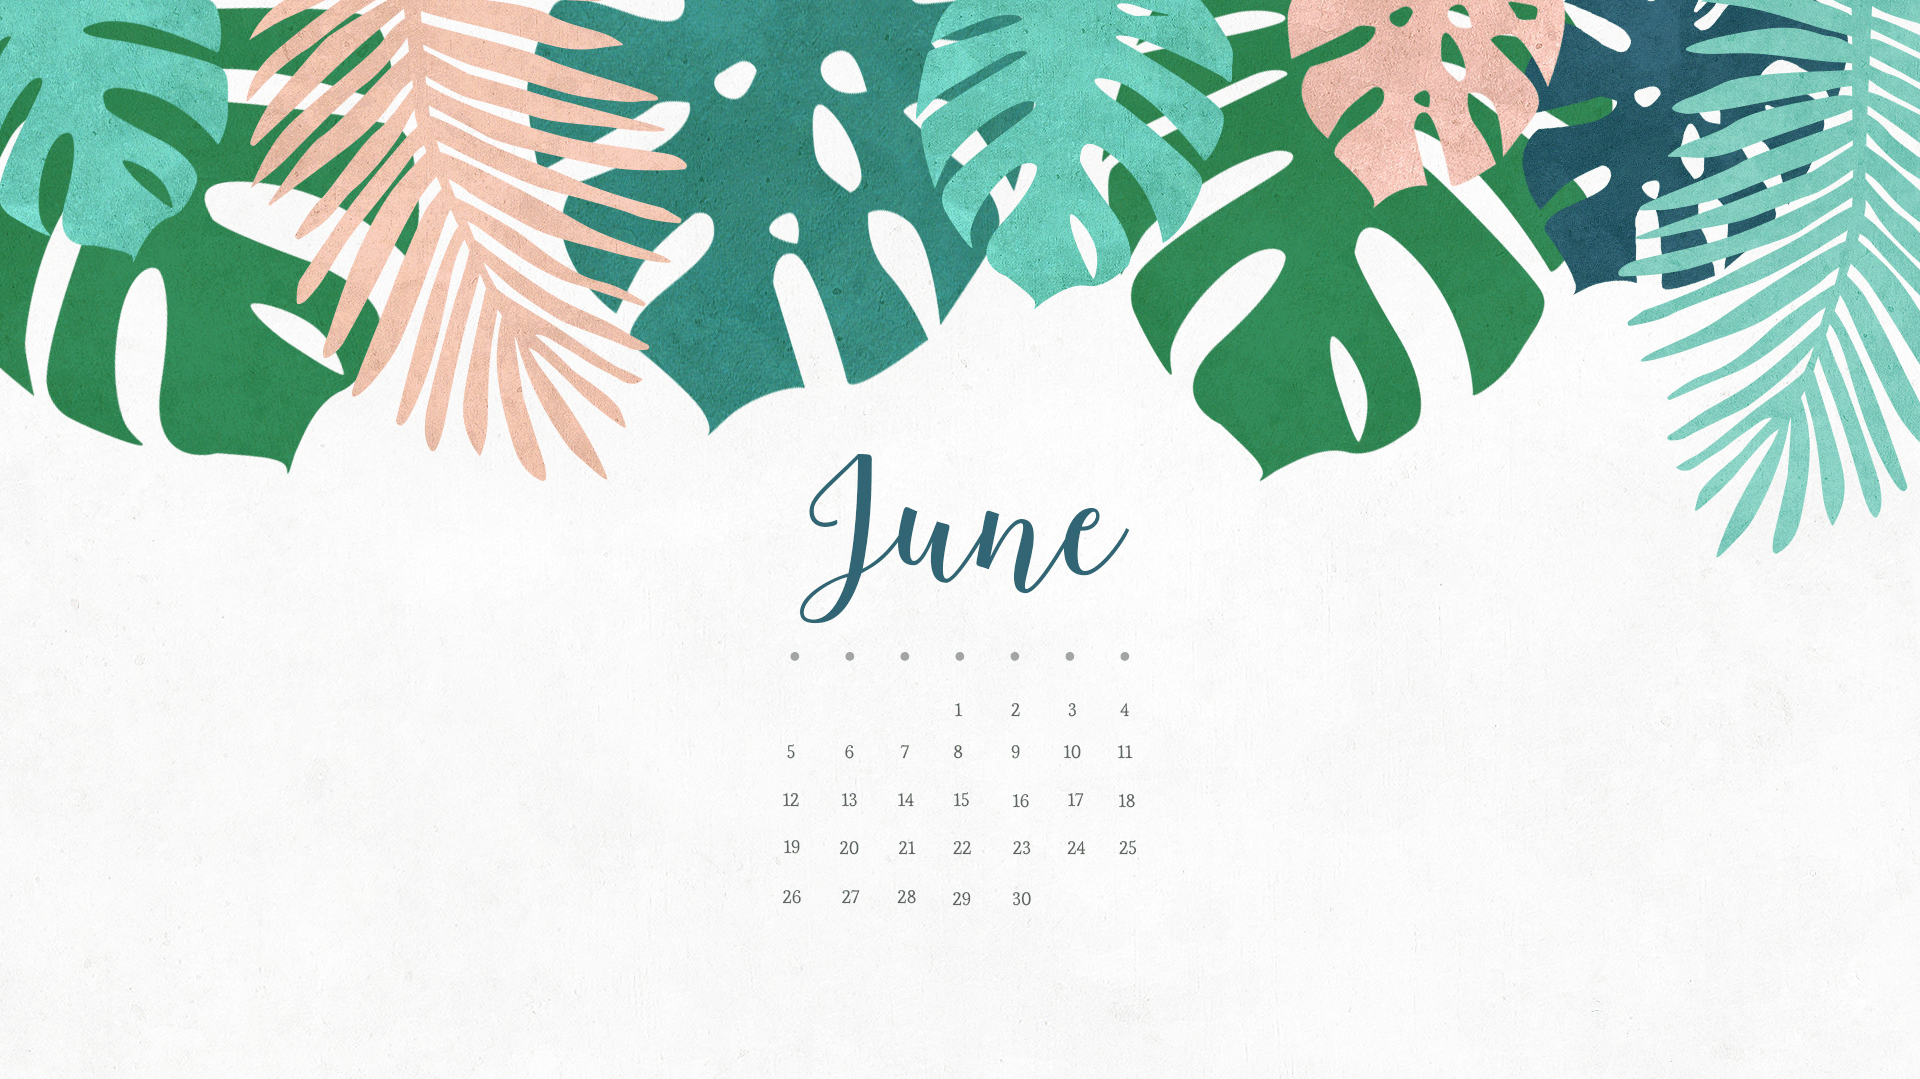 Wallpaper With June Calendar For Pc iPad And Smartphone